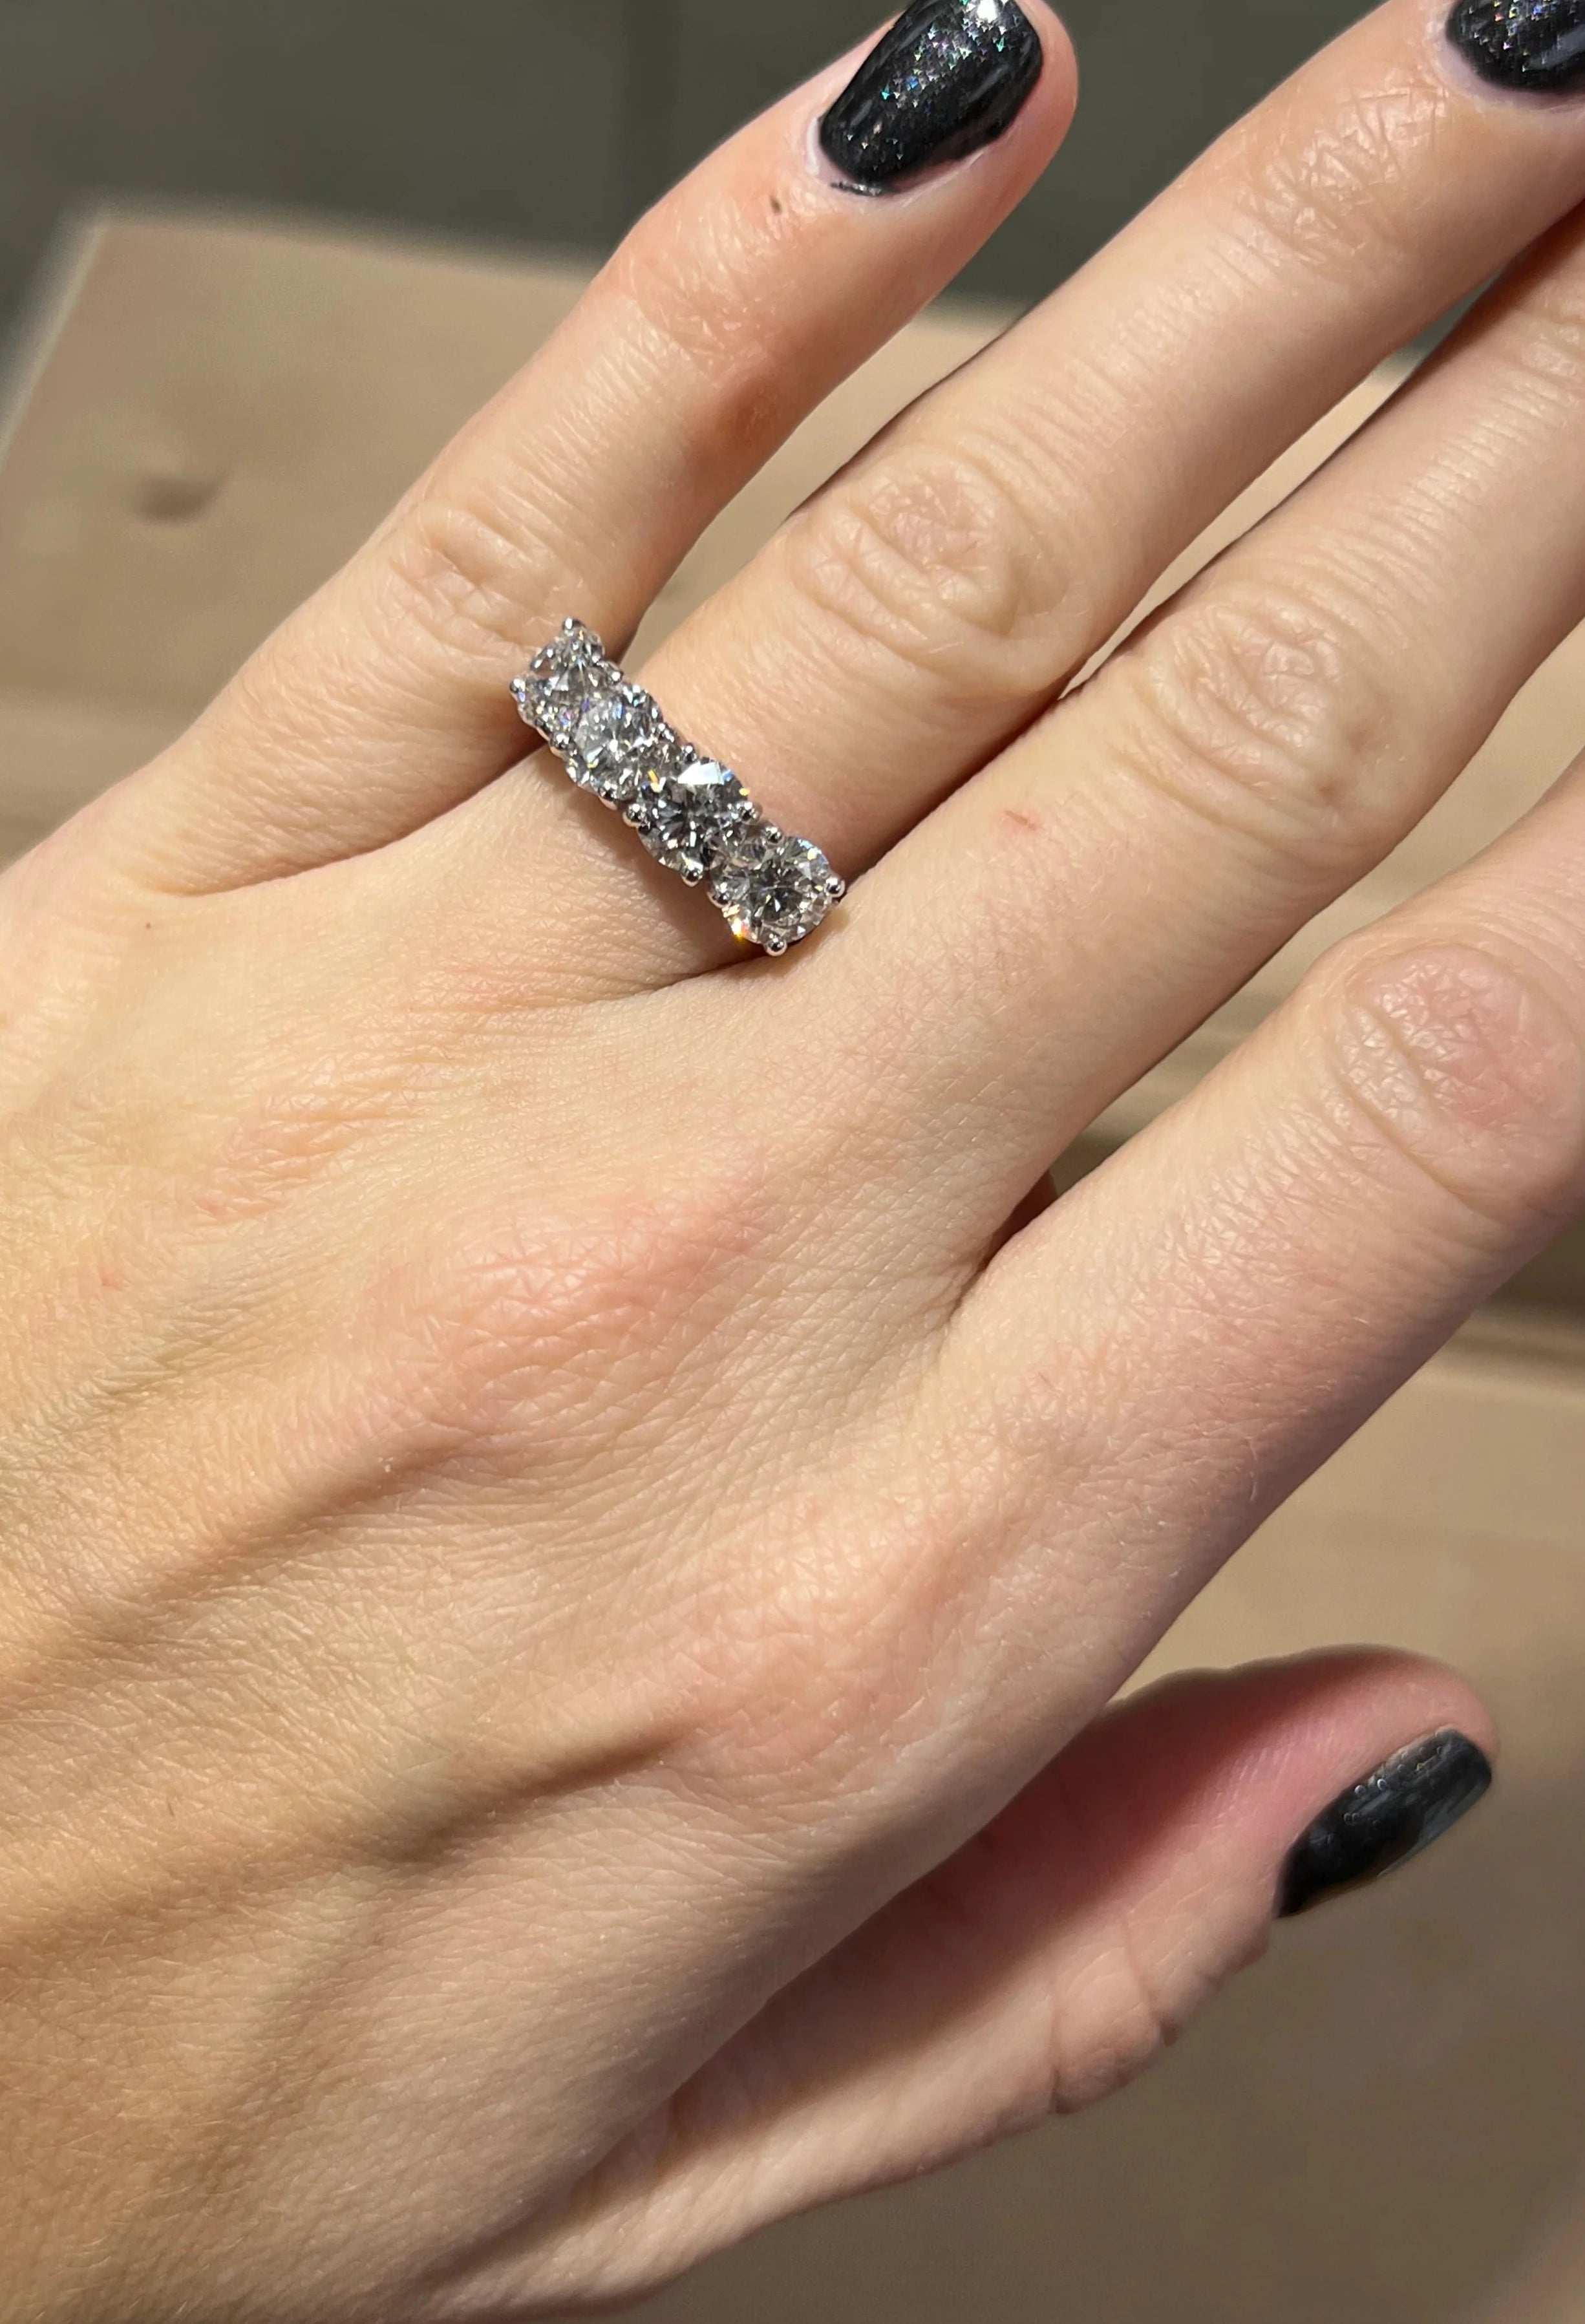 Purchase a 14K White Gold 4 CT Black Kite Diamond Ring for Her Today!